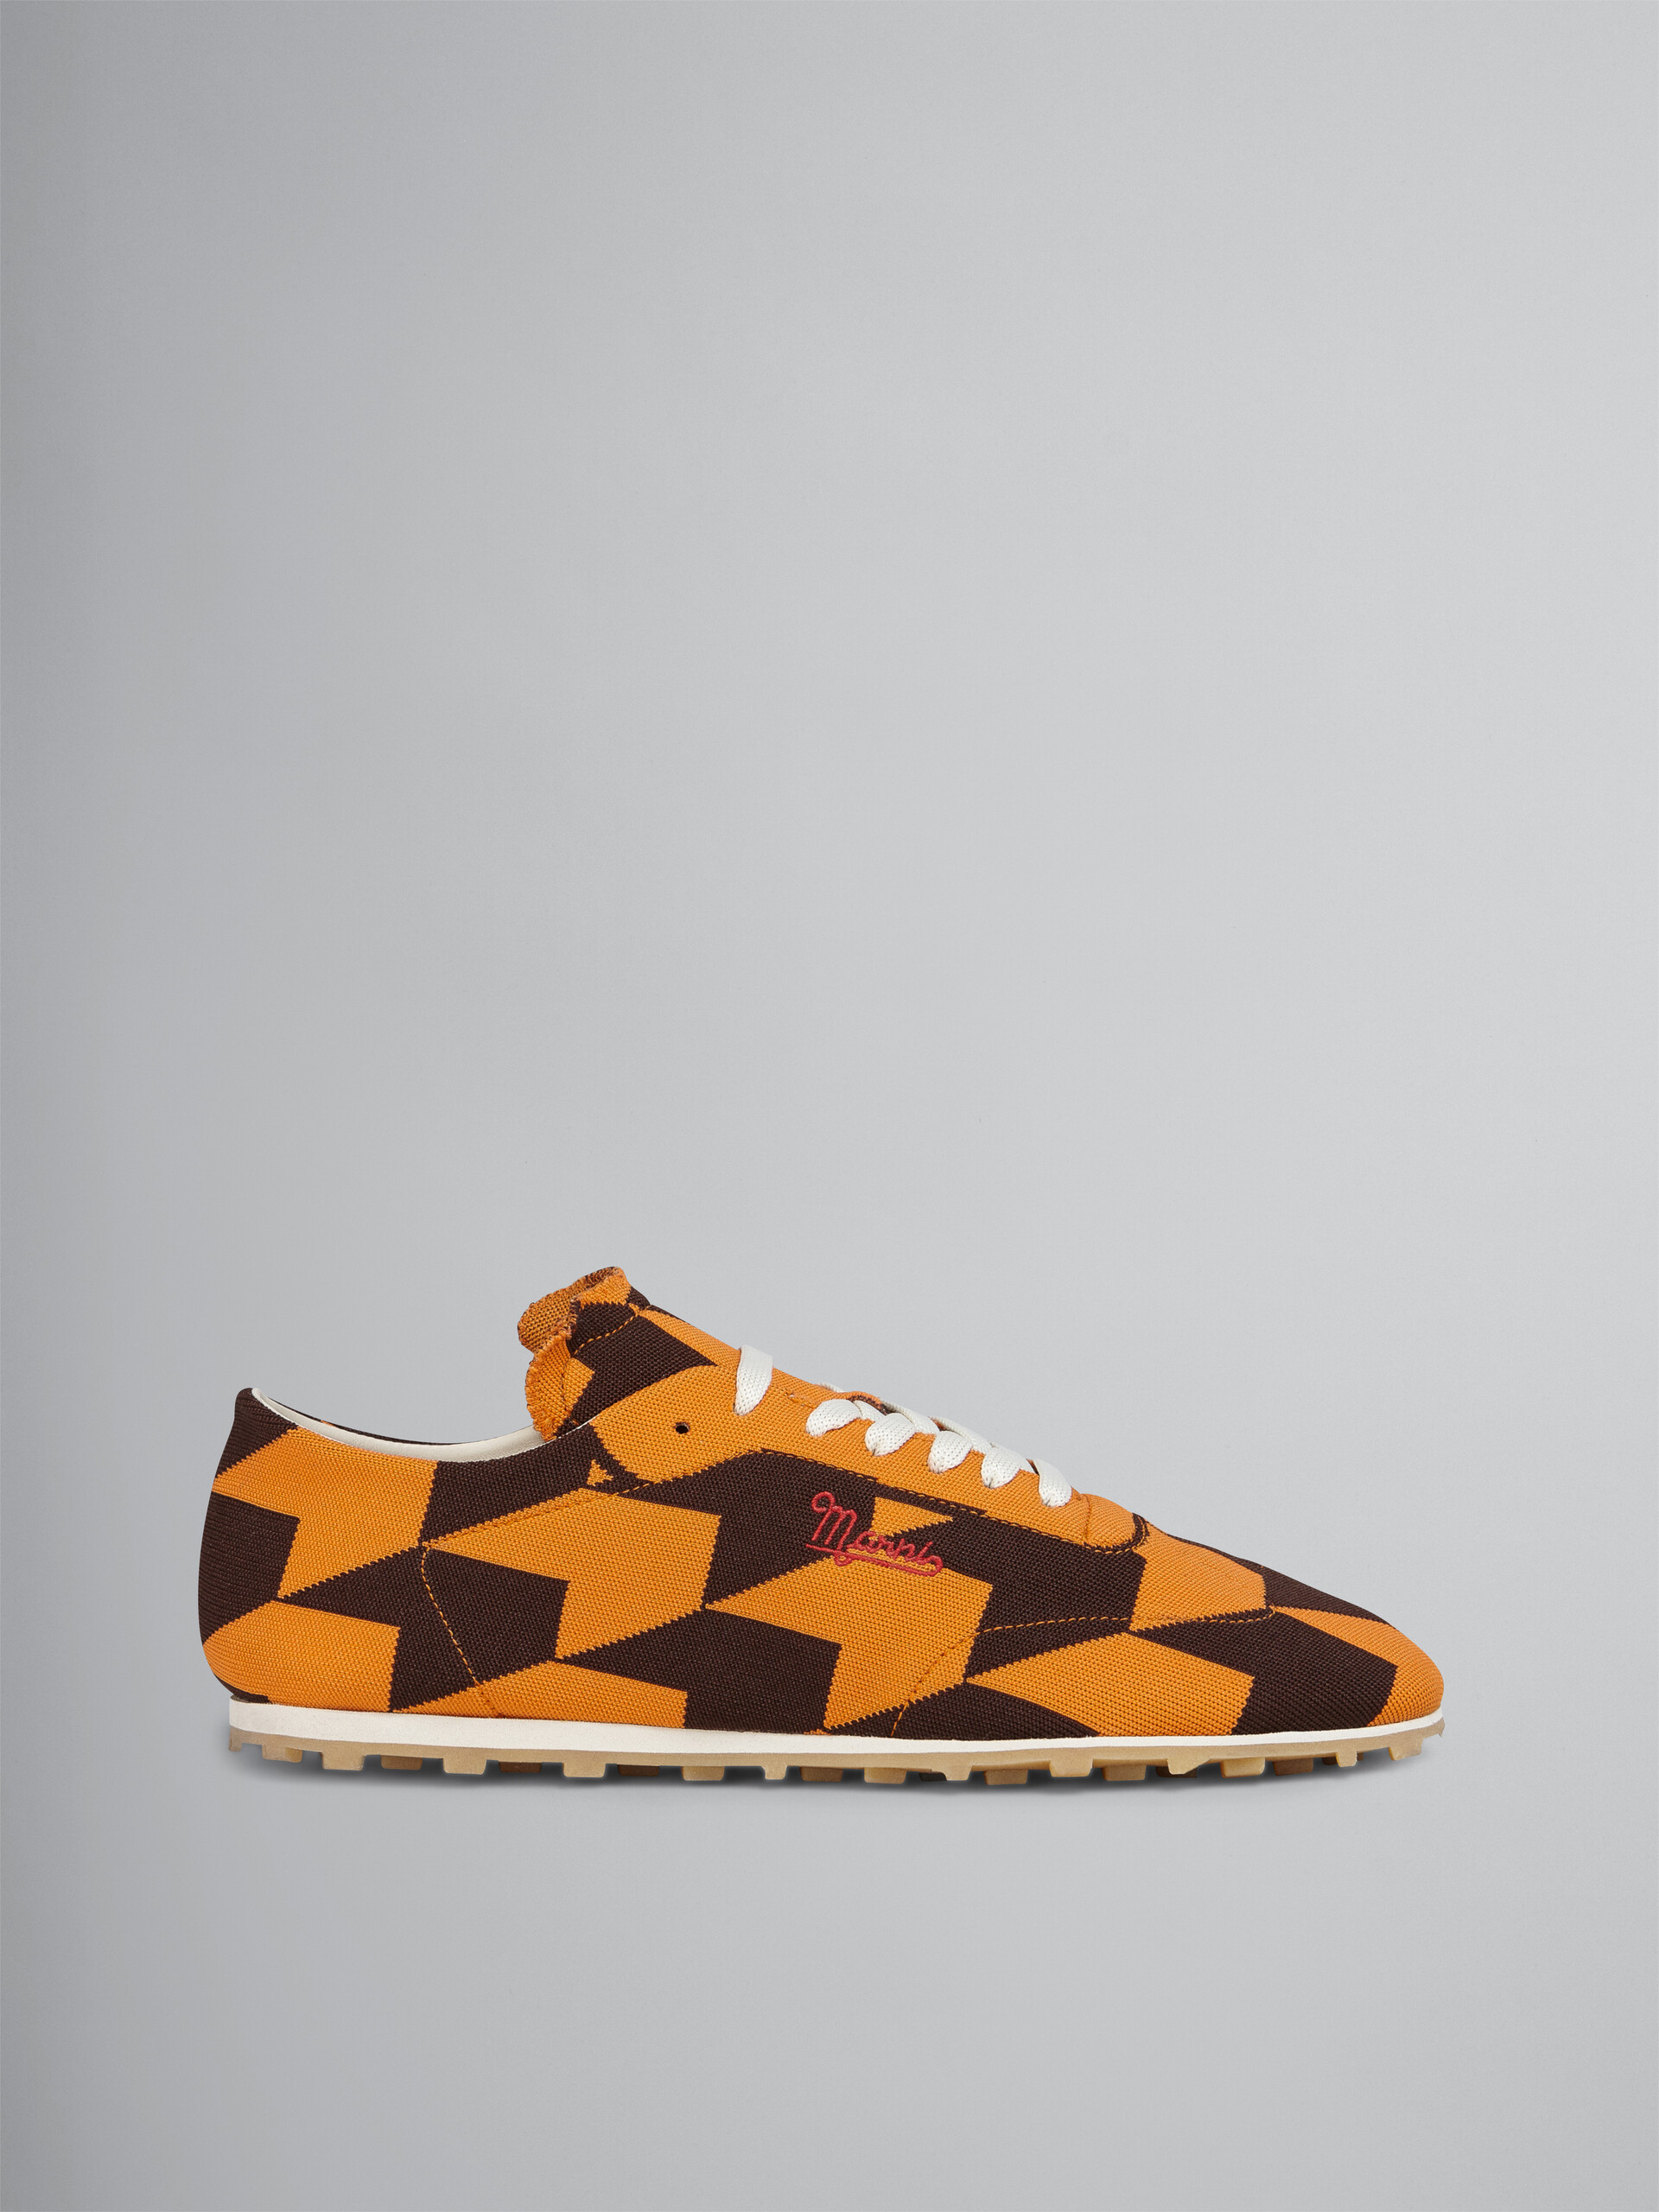 Houndstooth stretch jacquard PEBBLE sneaker - Sneakers - Image 1